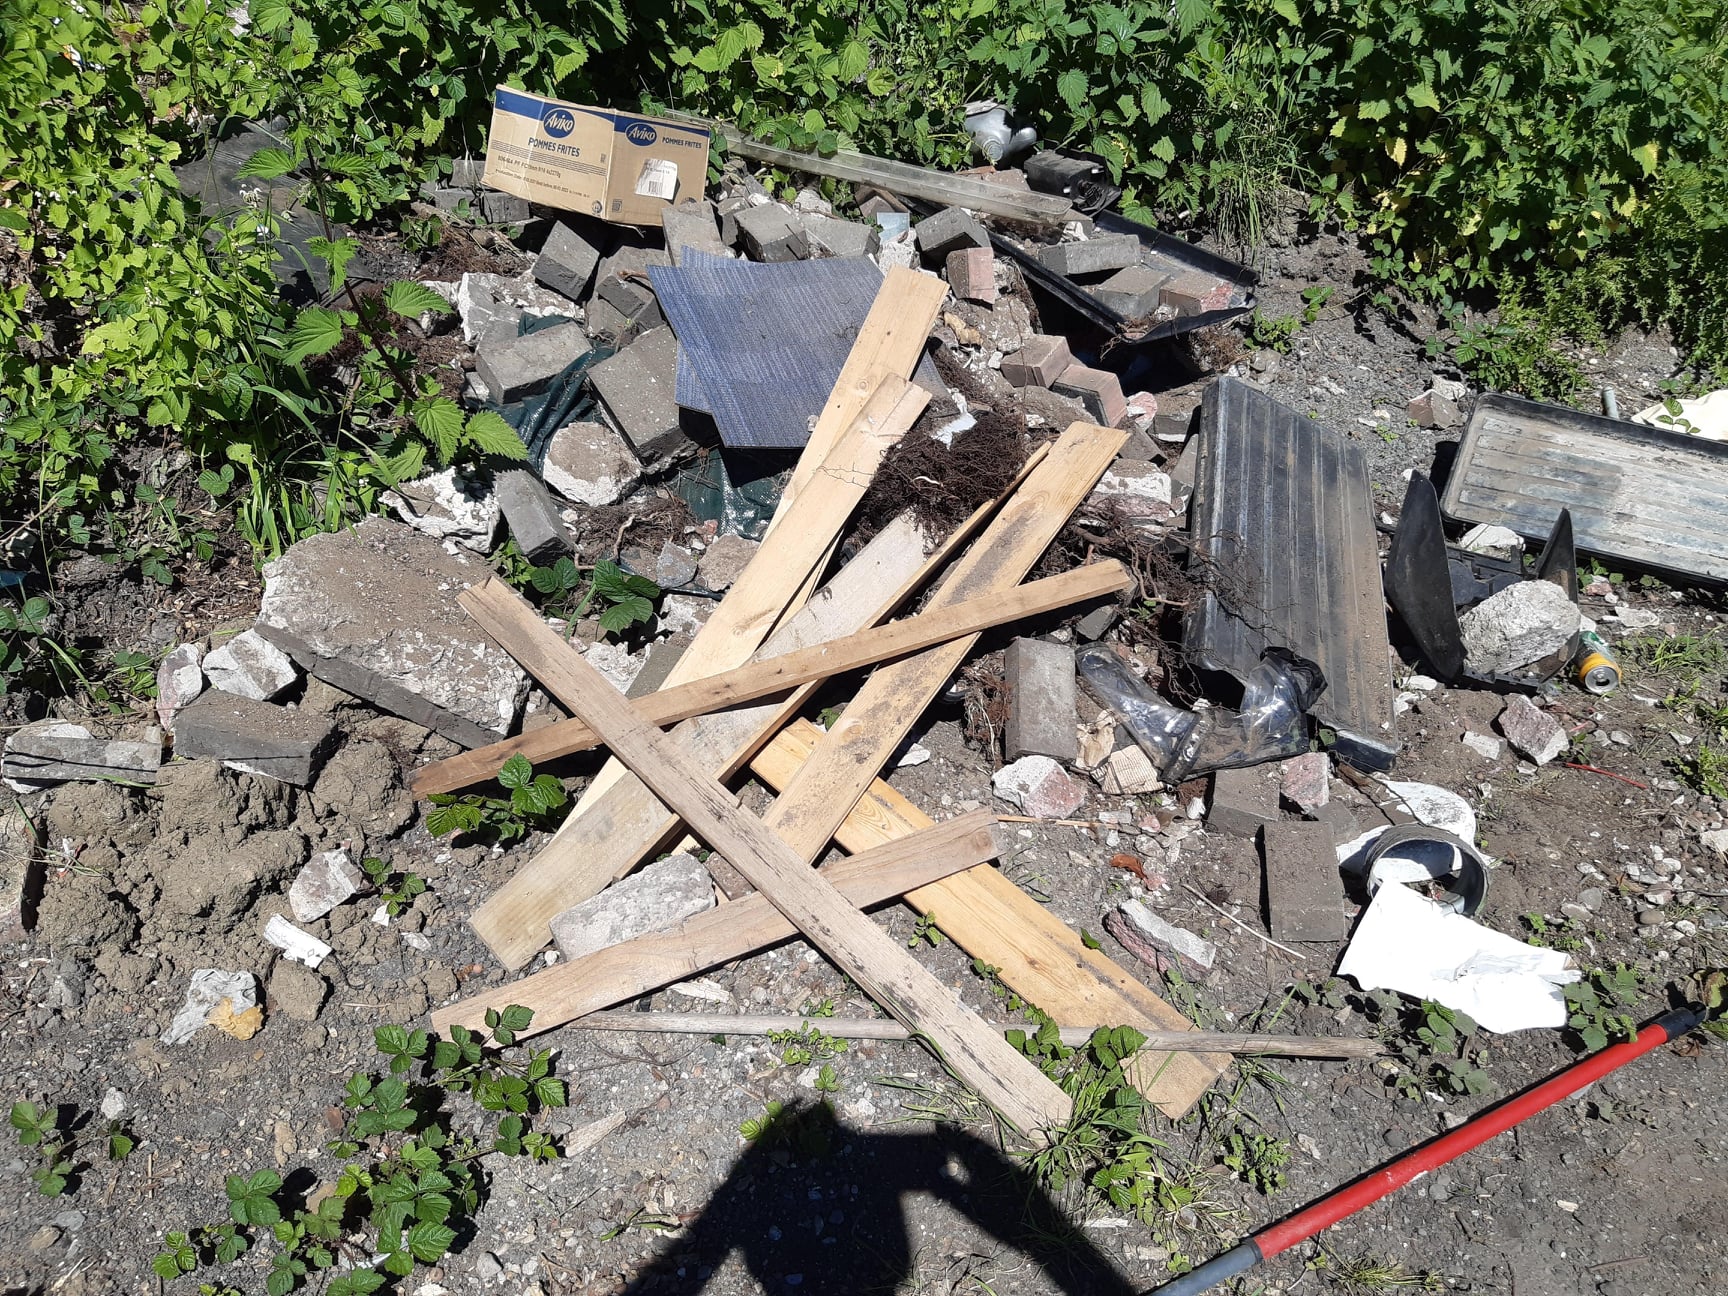 Hidden cameras help catch fly tipper who repeatedly dumped waste 